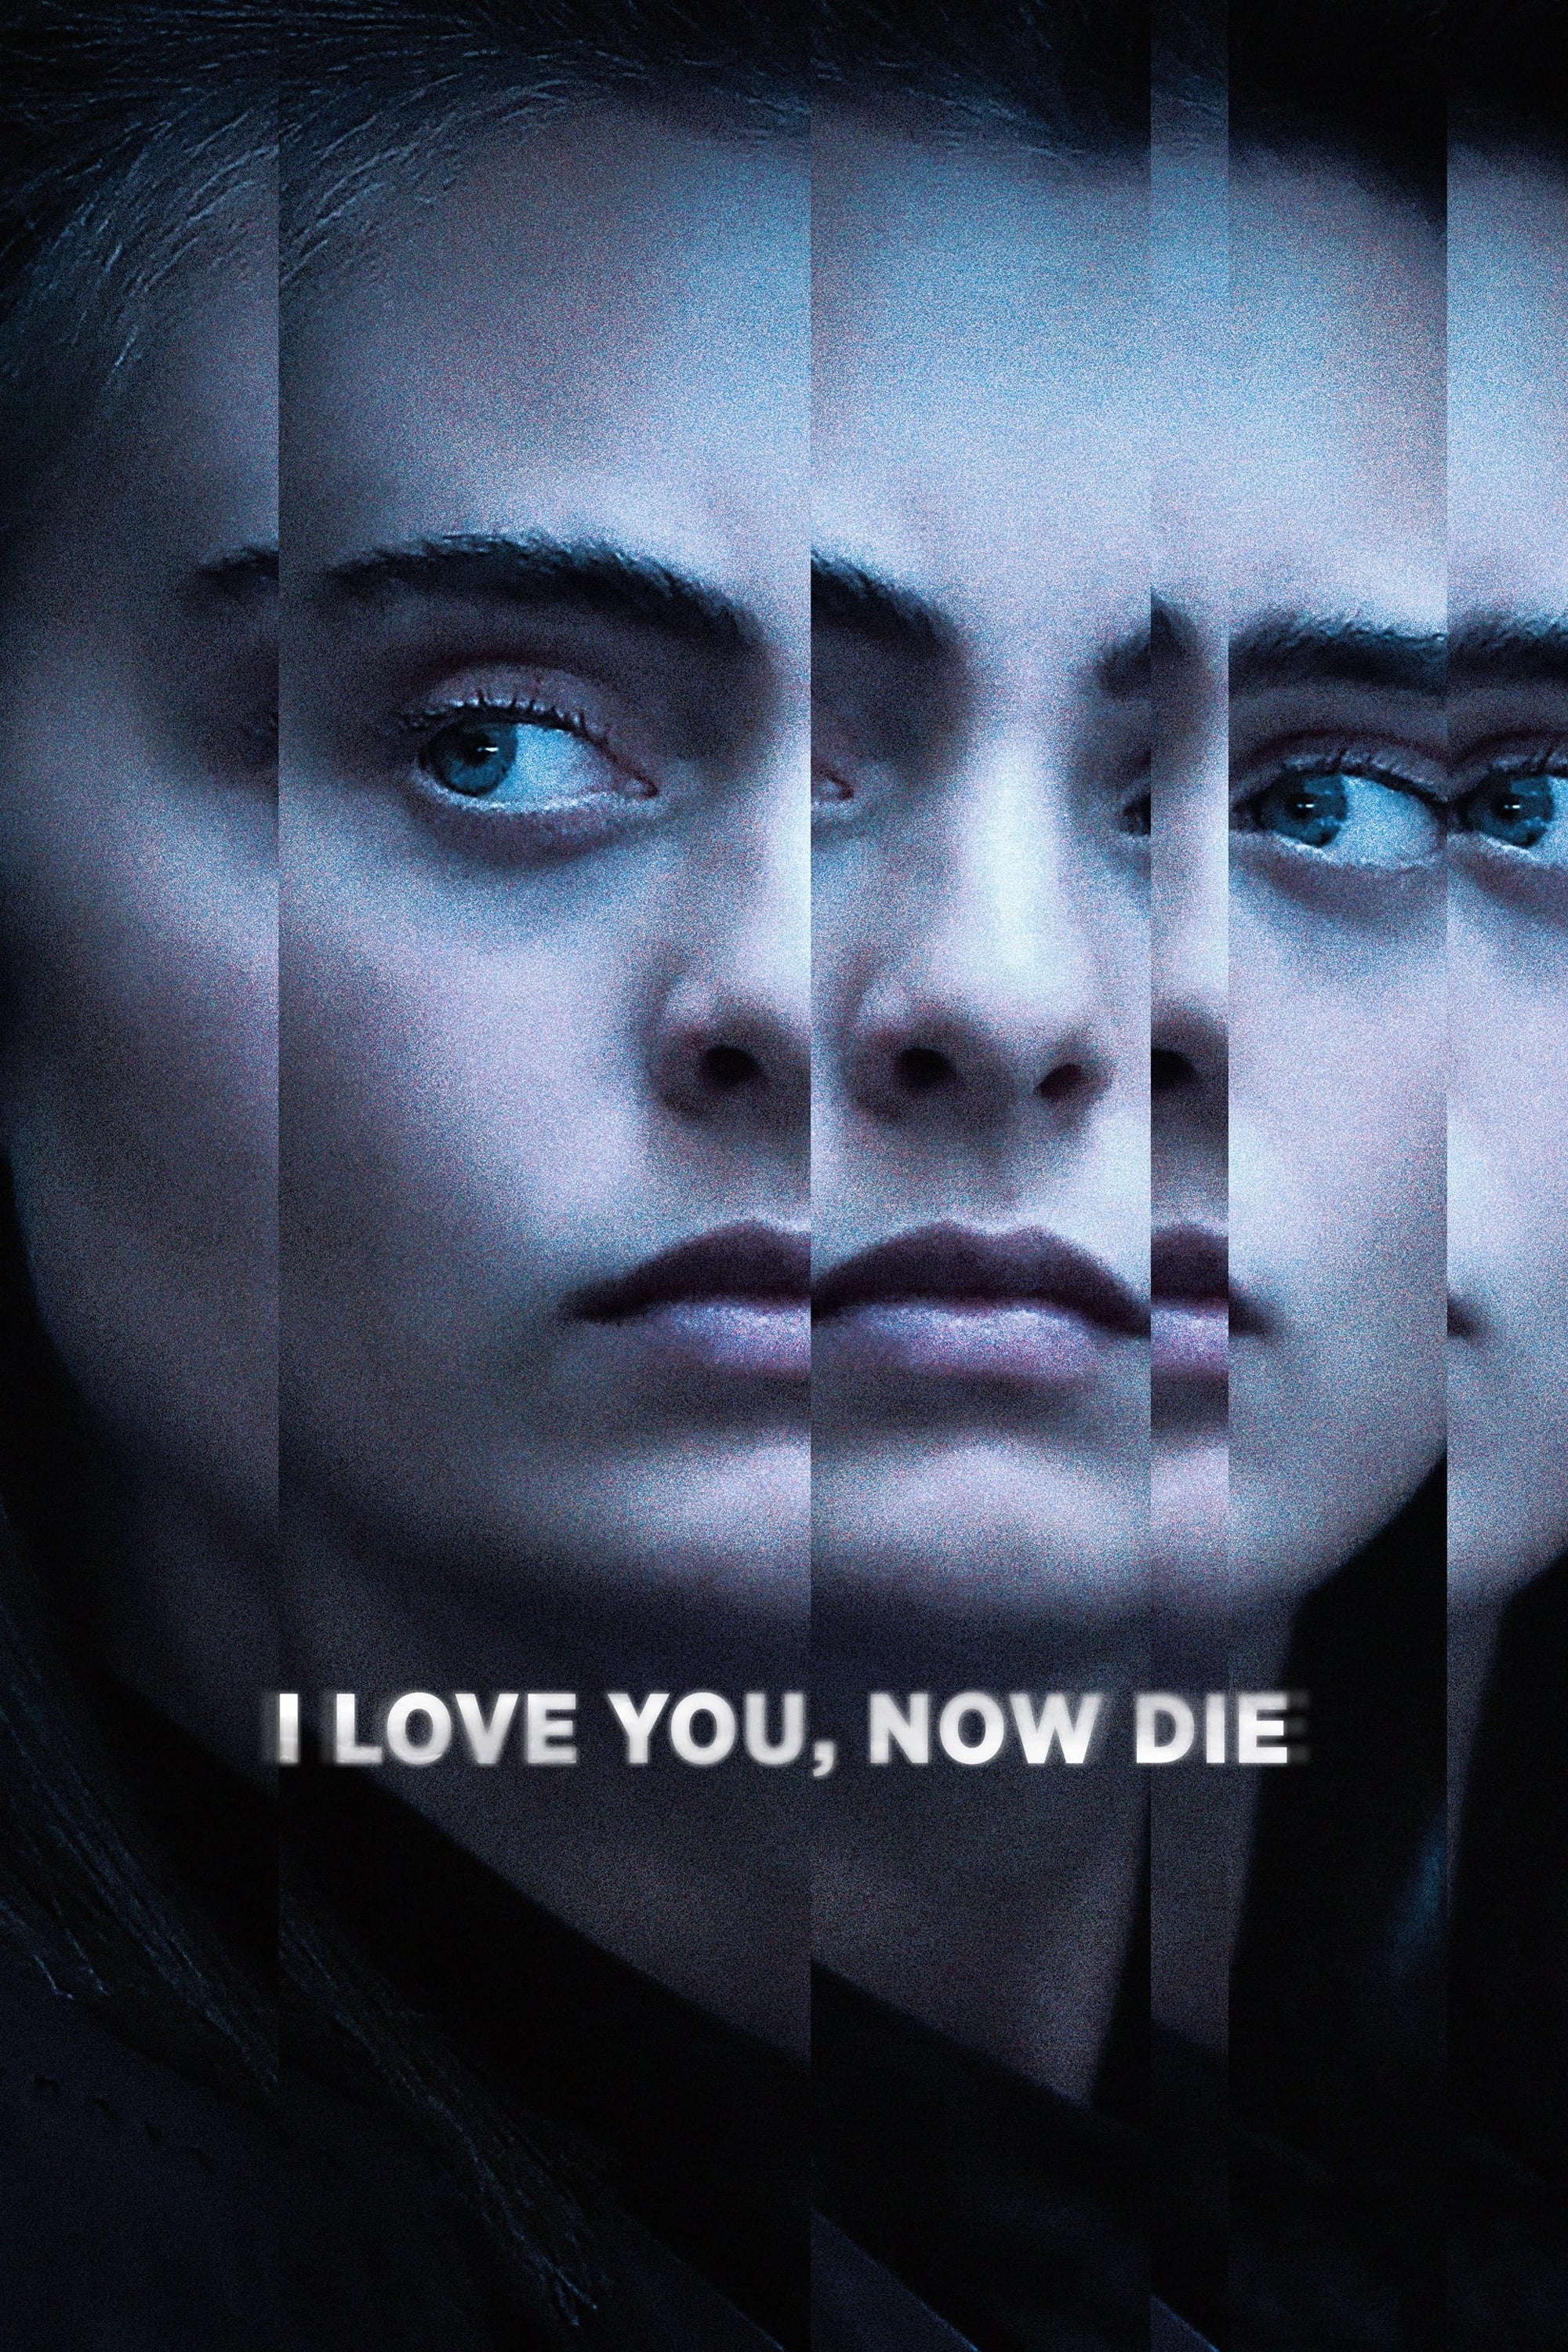 I Love You, Now Die: The Commonwealth v. Michelle Carter TV Shows About Suicide